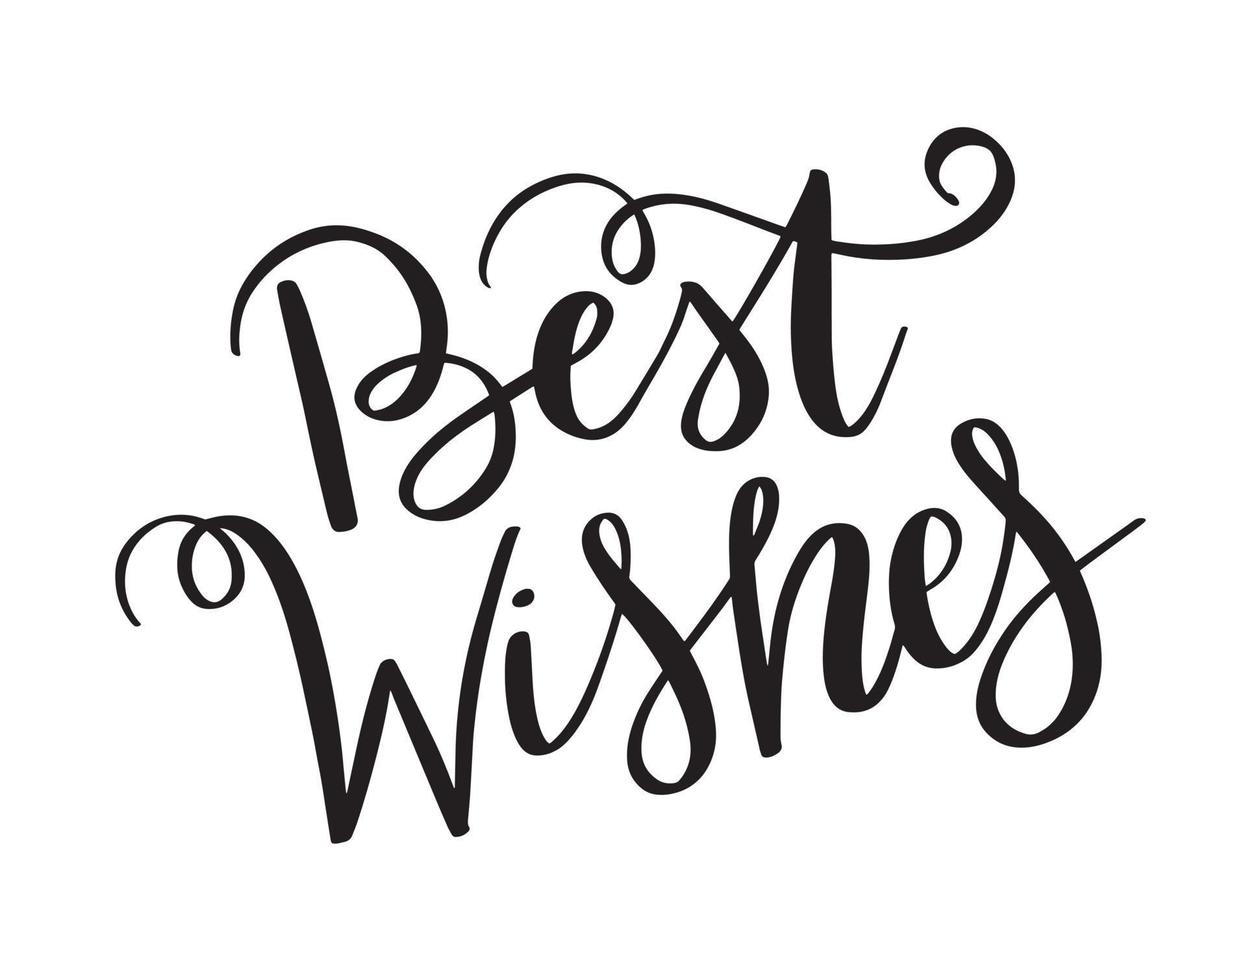 Best Wishes hand drawn lettering. Handwritten Christmas calligraphy. Greeting holidays card design. vector